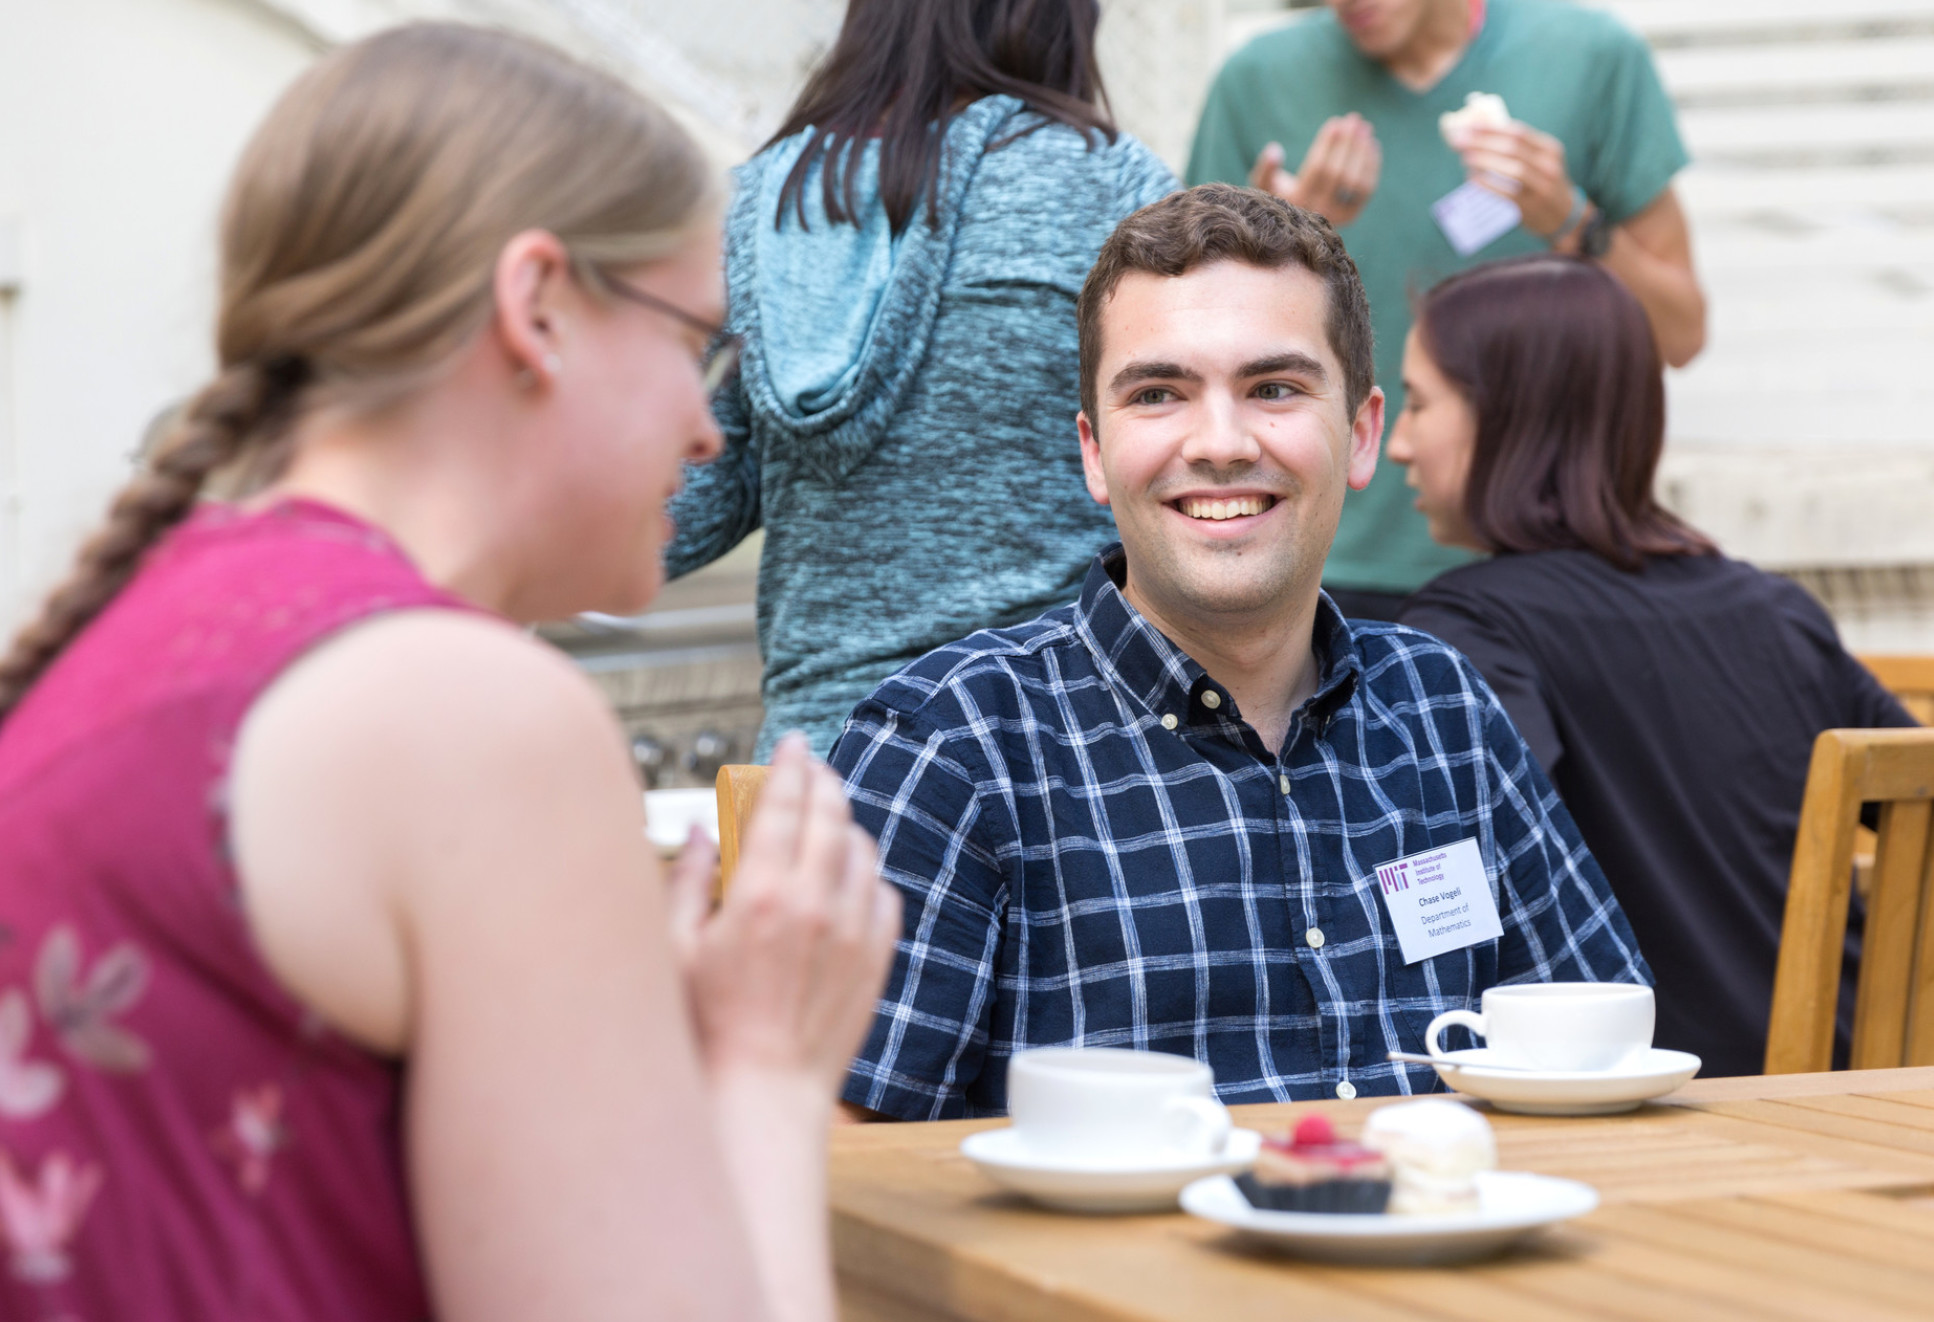 A student at an afternoon tea event